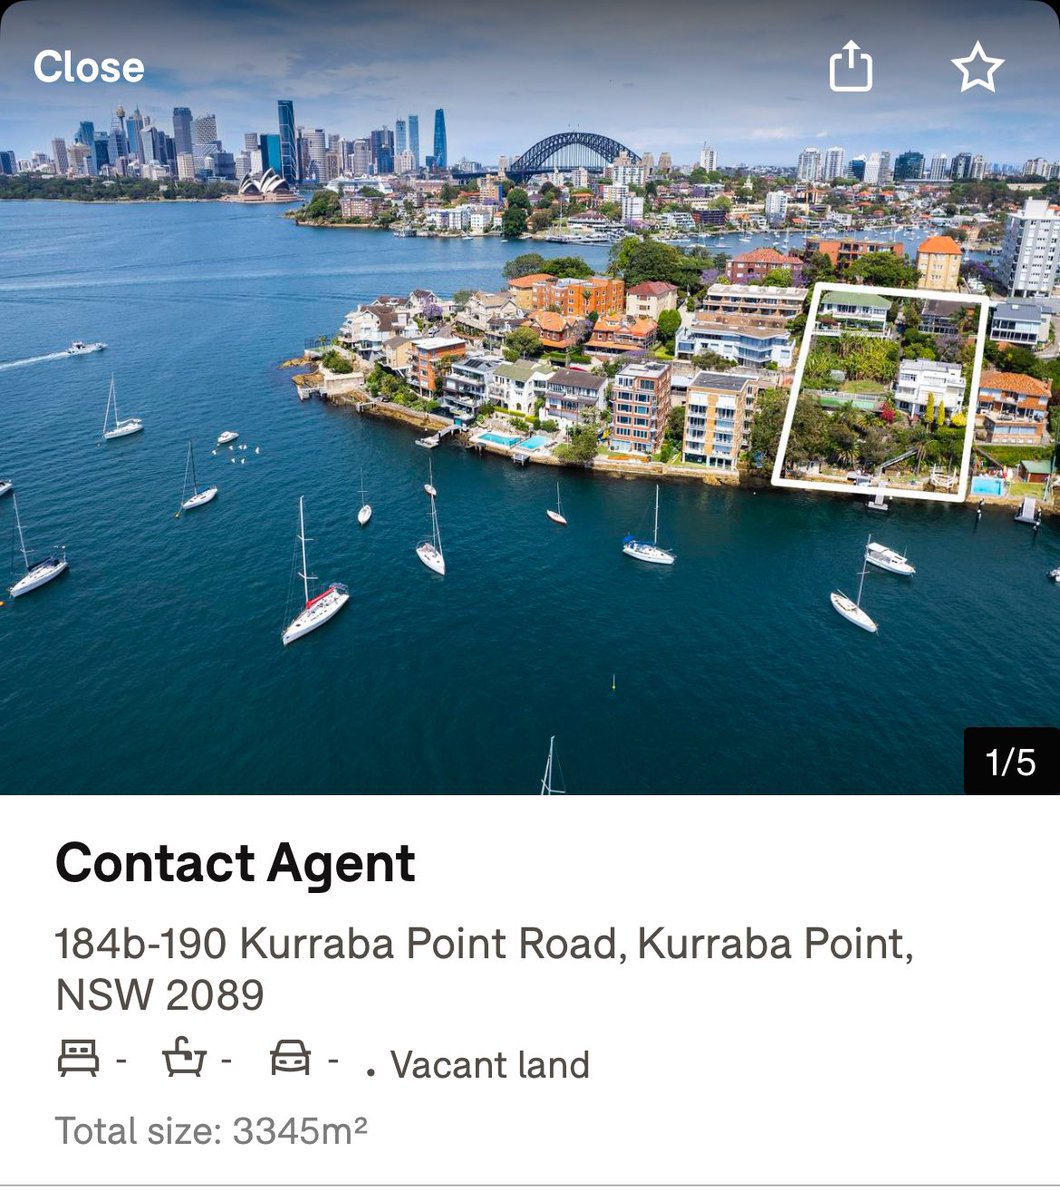 Whoever buys this property deserves an Order of Australia Medal and a dinner with the Prime Minister.